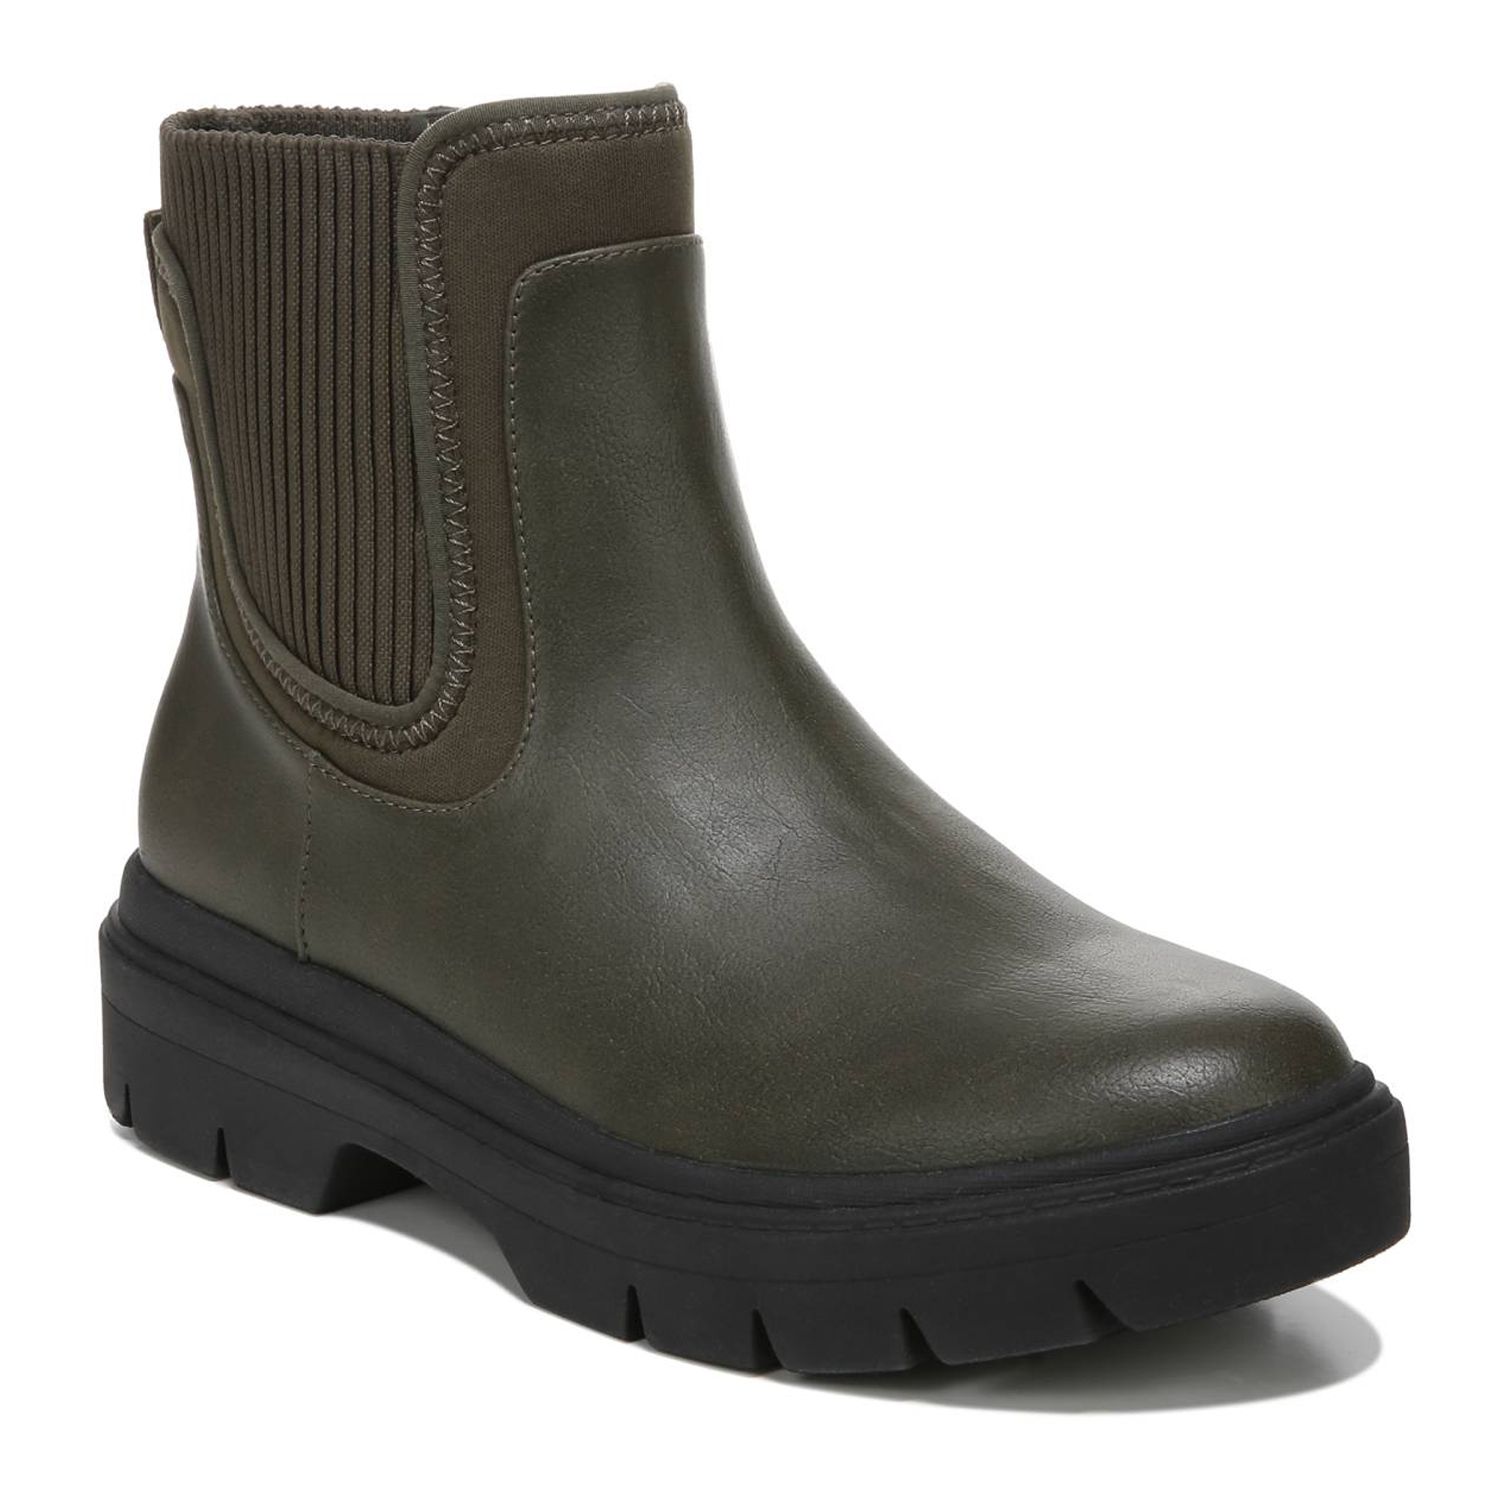 Image for Dr. Scholl's Craze Women's Chelsea Boots at Kohl's.